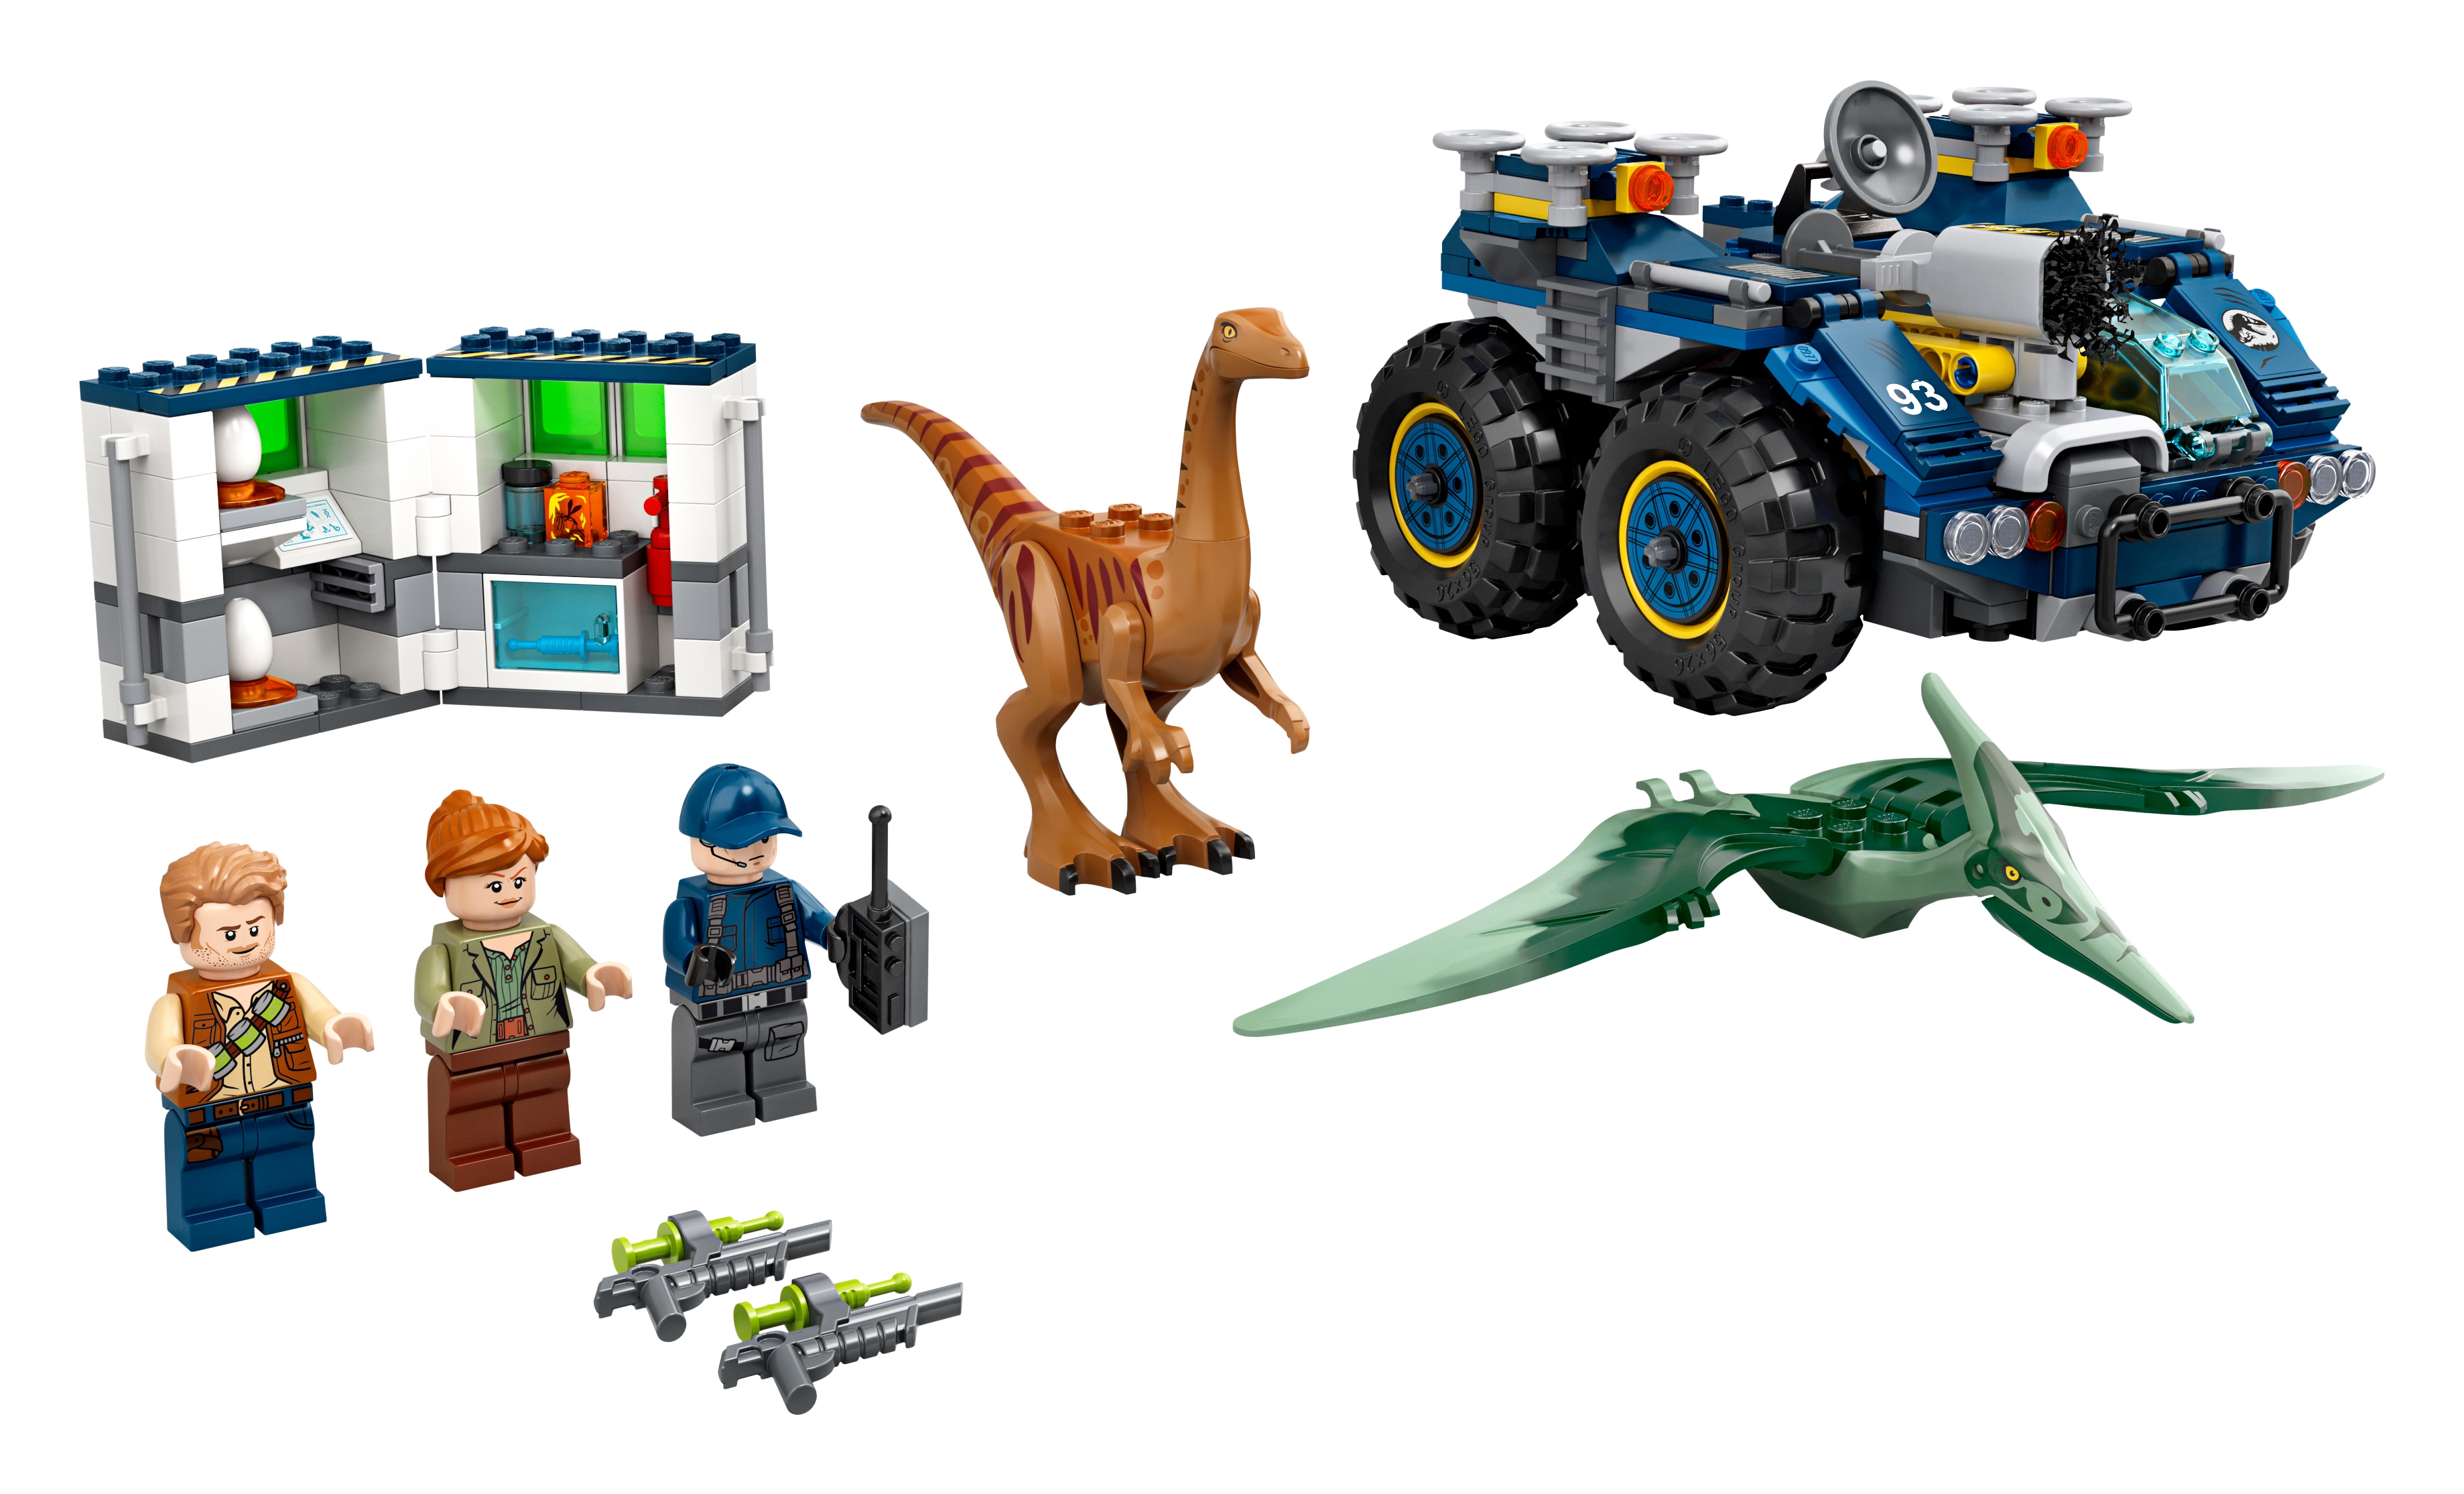 LEGO 75940 Jurassic World Gallimimus and Pteranodon Breakout Building Set New 